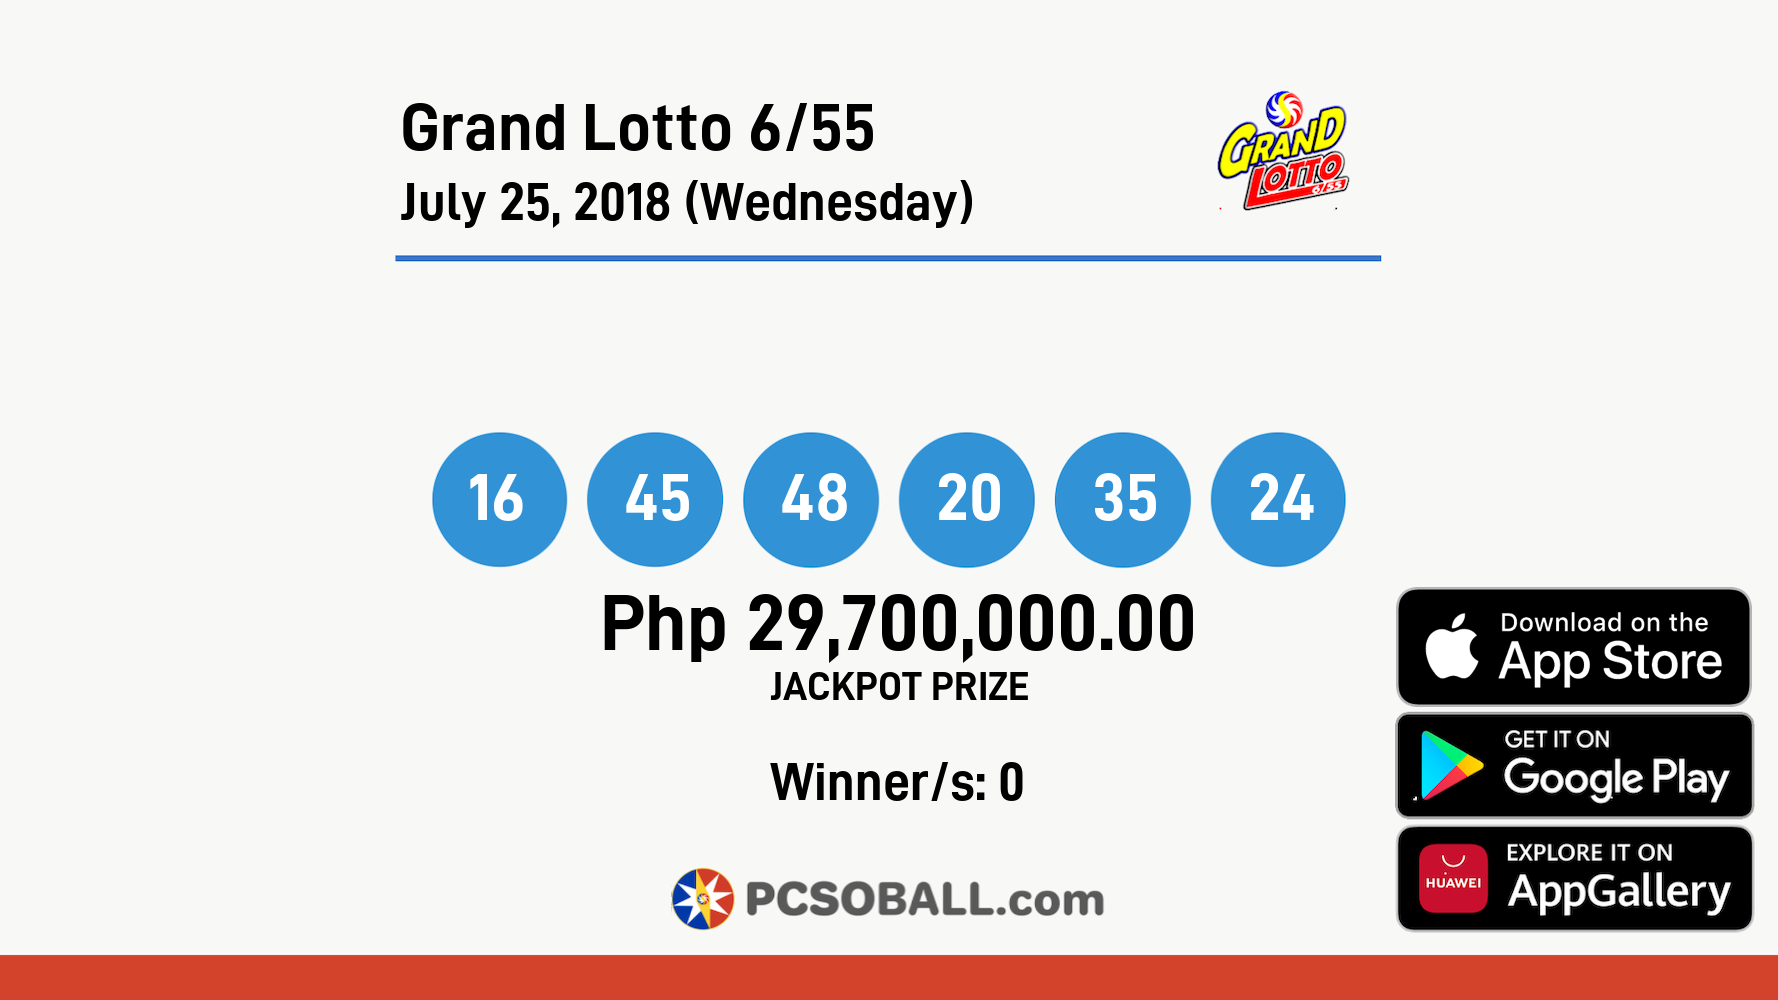 Grand Lotto 6/55 July 25, 2018 (Wednesday) Result